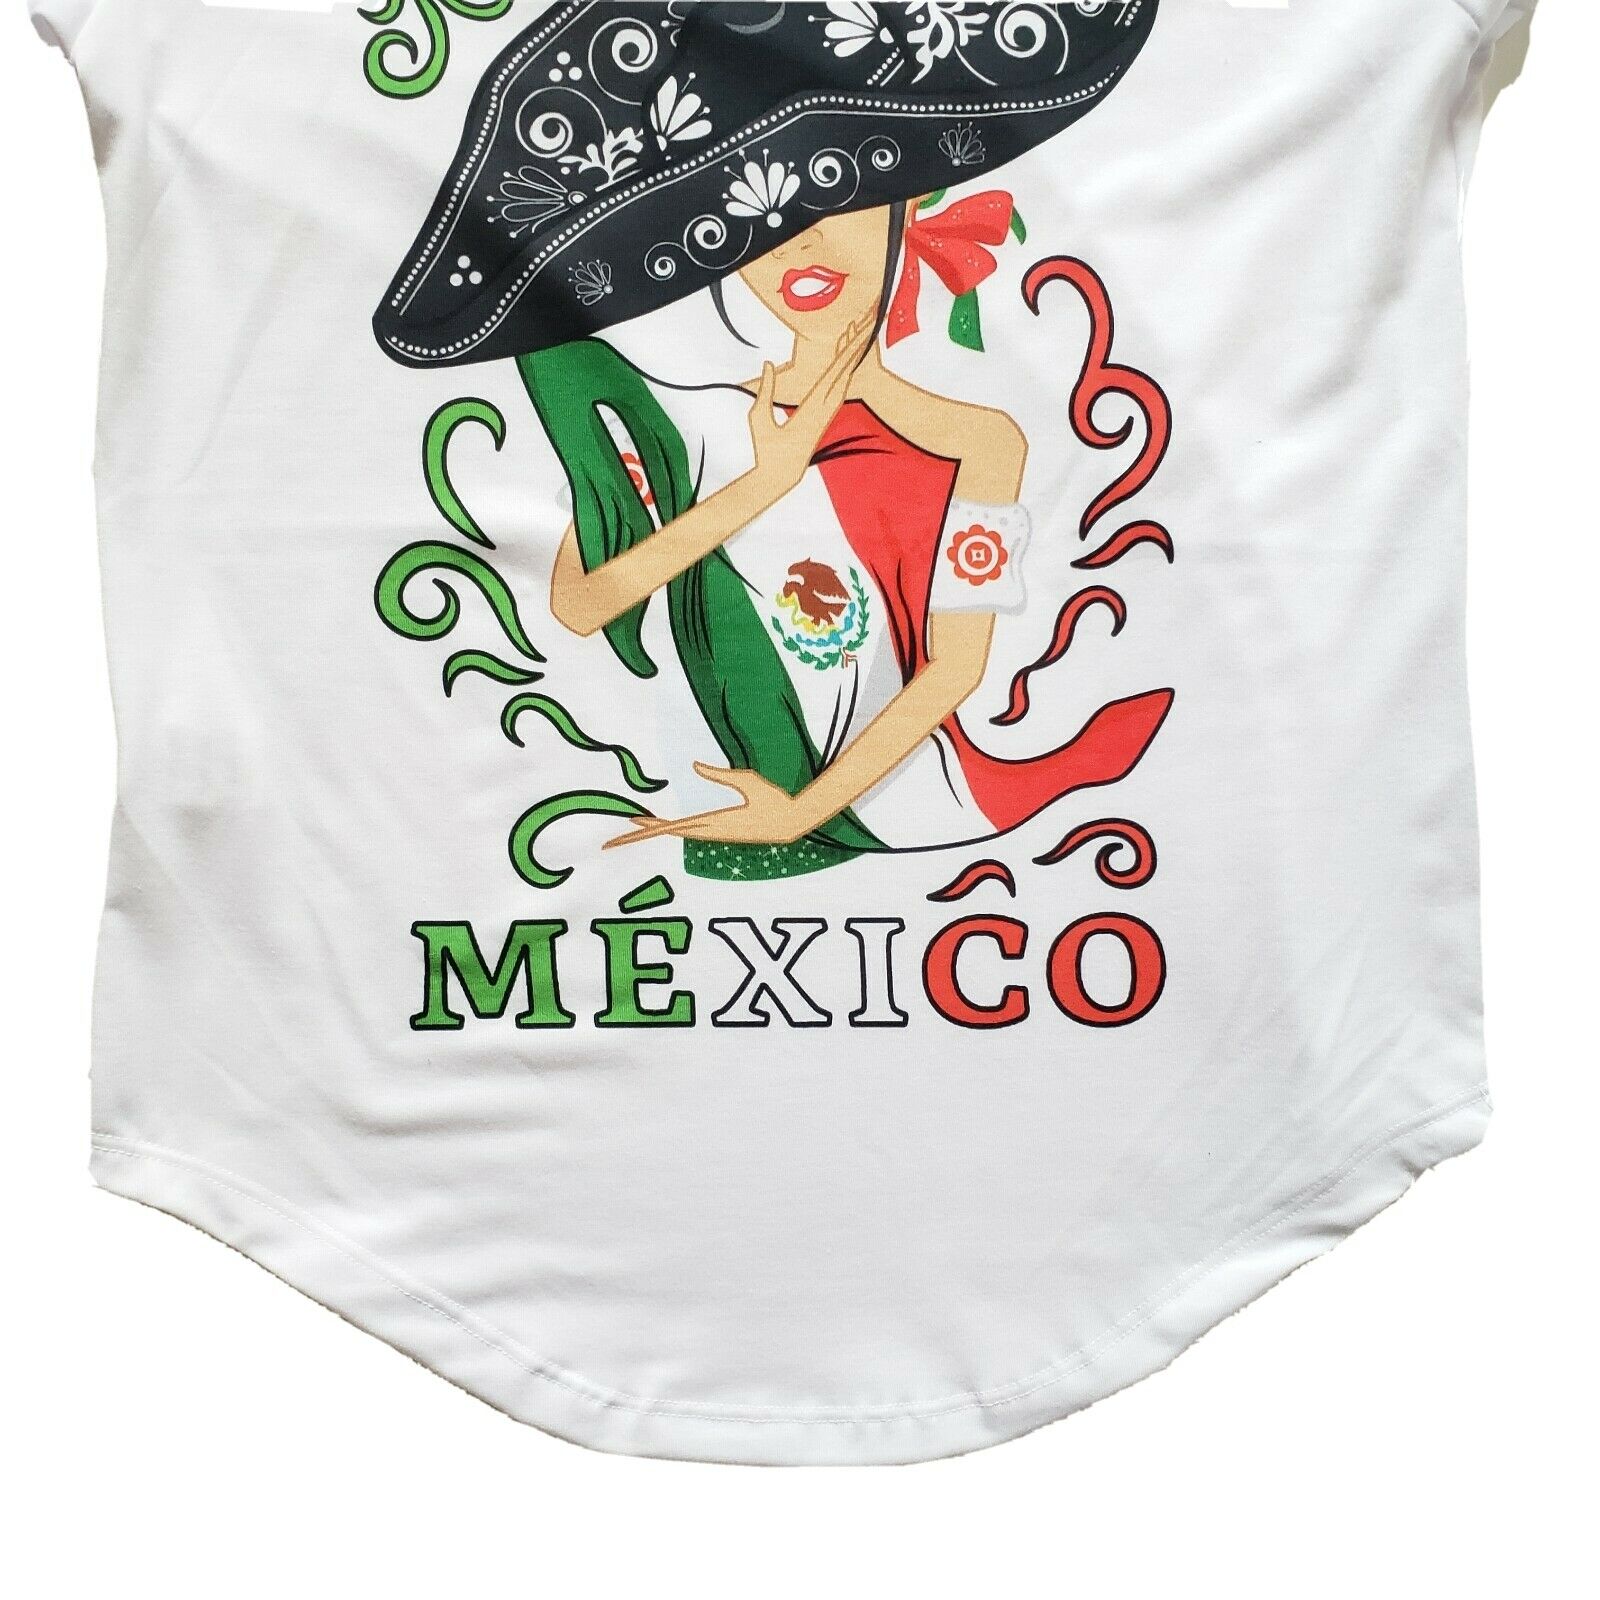 Mexican Women's Graphic Tee Floral Oaxaca T-Shirt Mexican Flag Hugging Mexico - The Little Pueblo